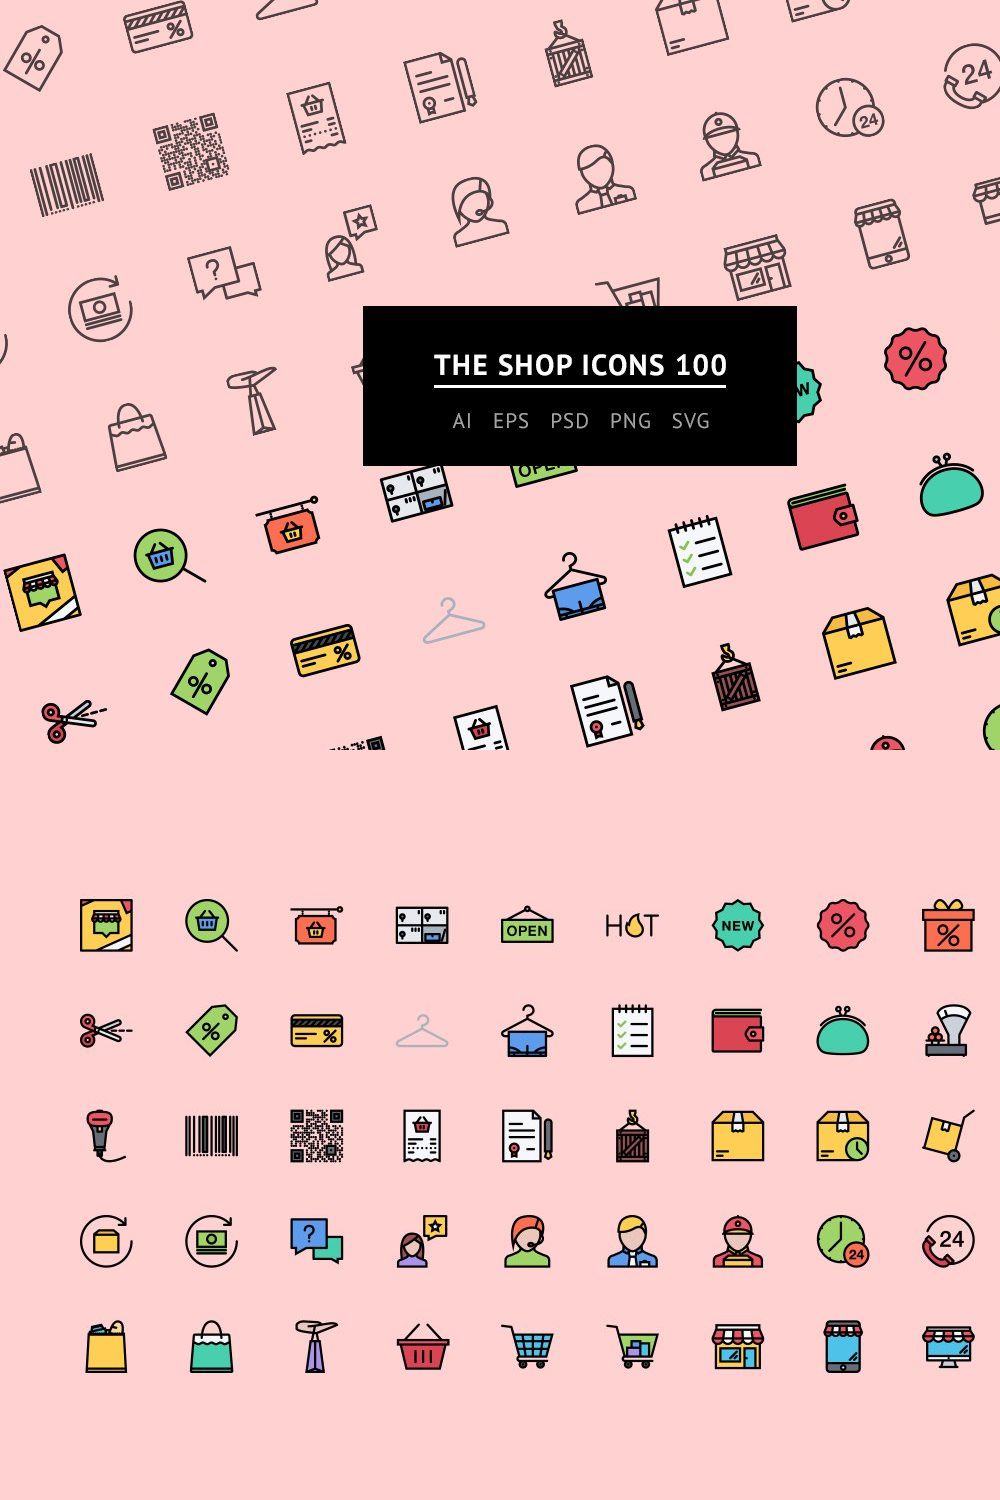 The Shop Icons 100 pinterest preview image.